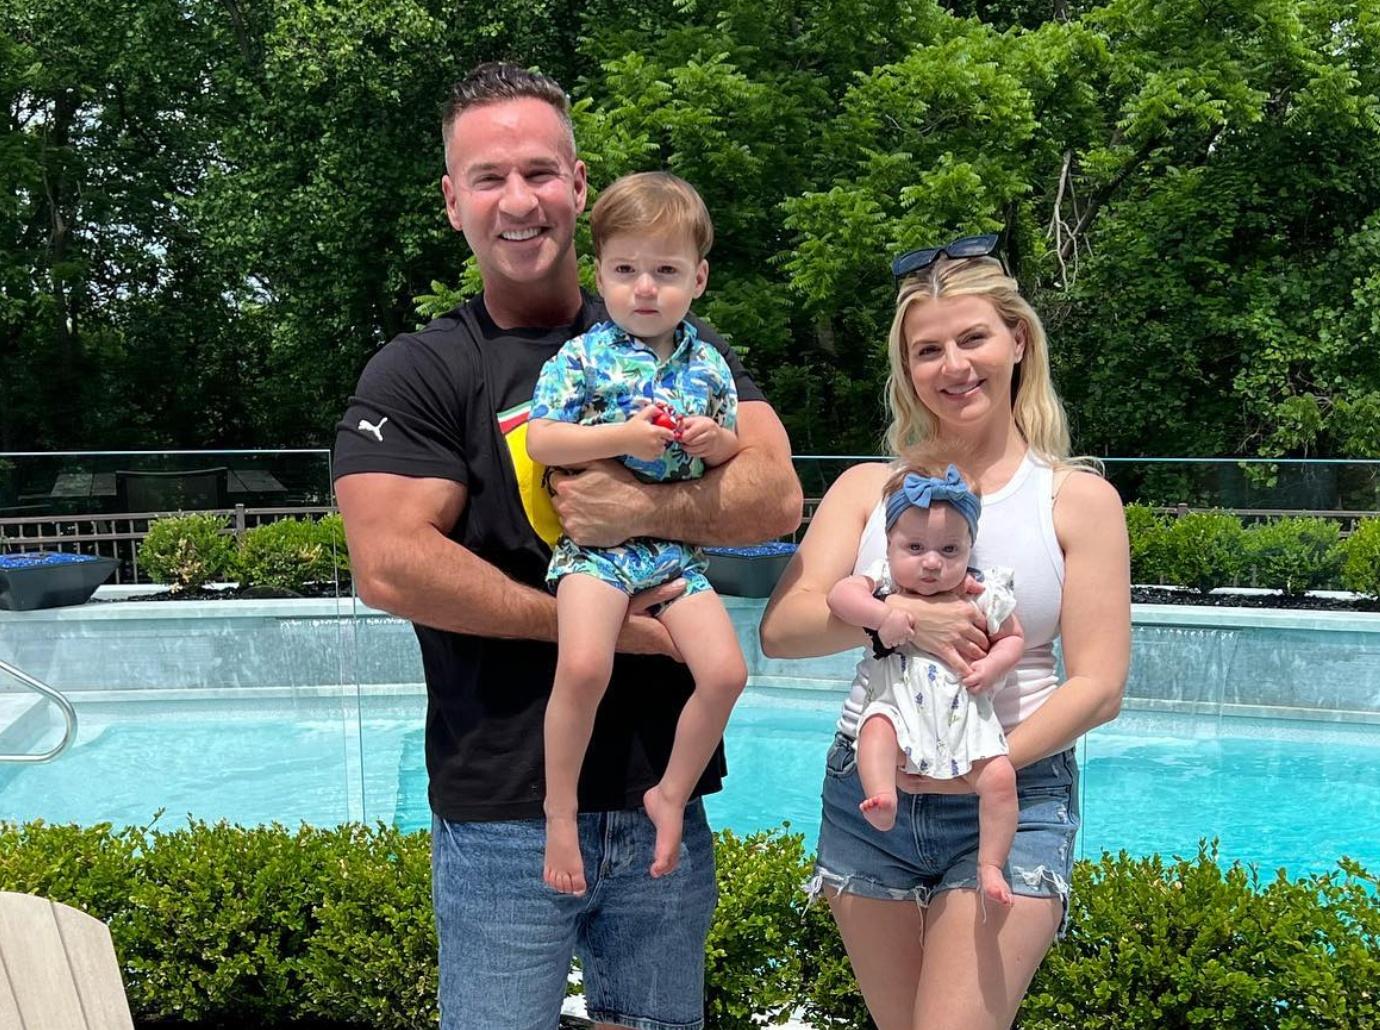 Mike 'The Situation' Sorrentino & Lauren Expecting Third Baby Together